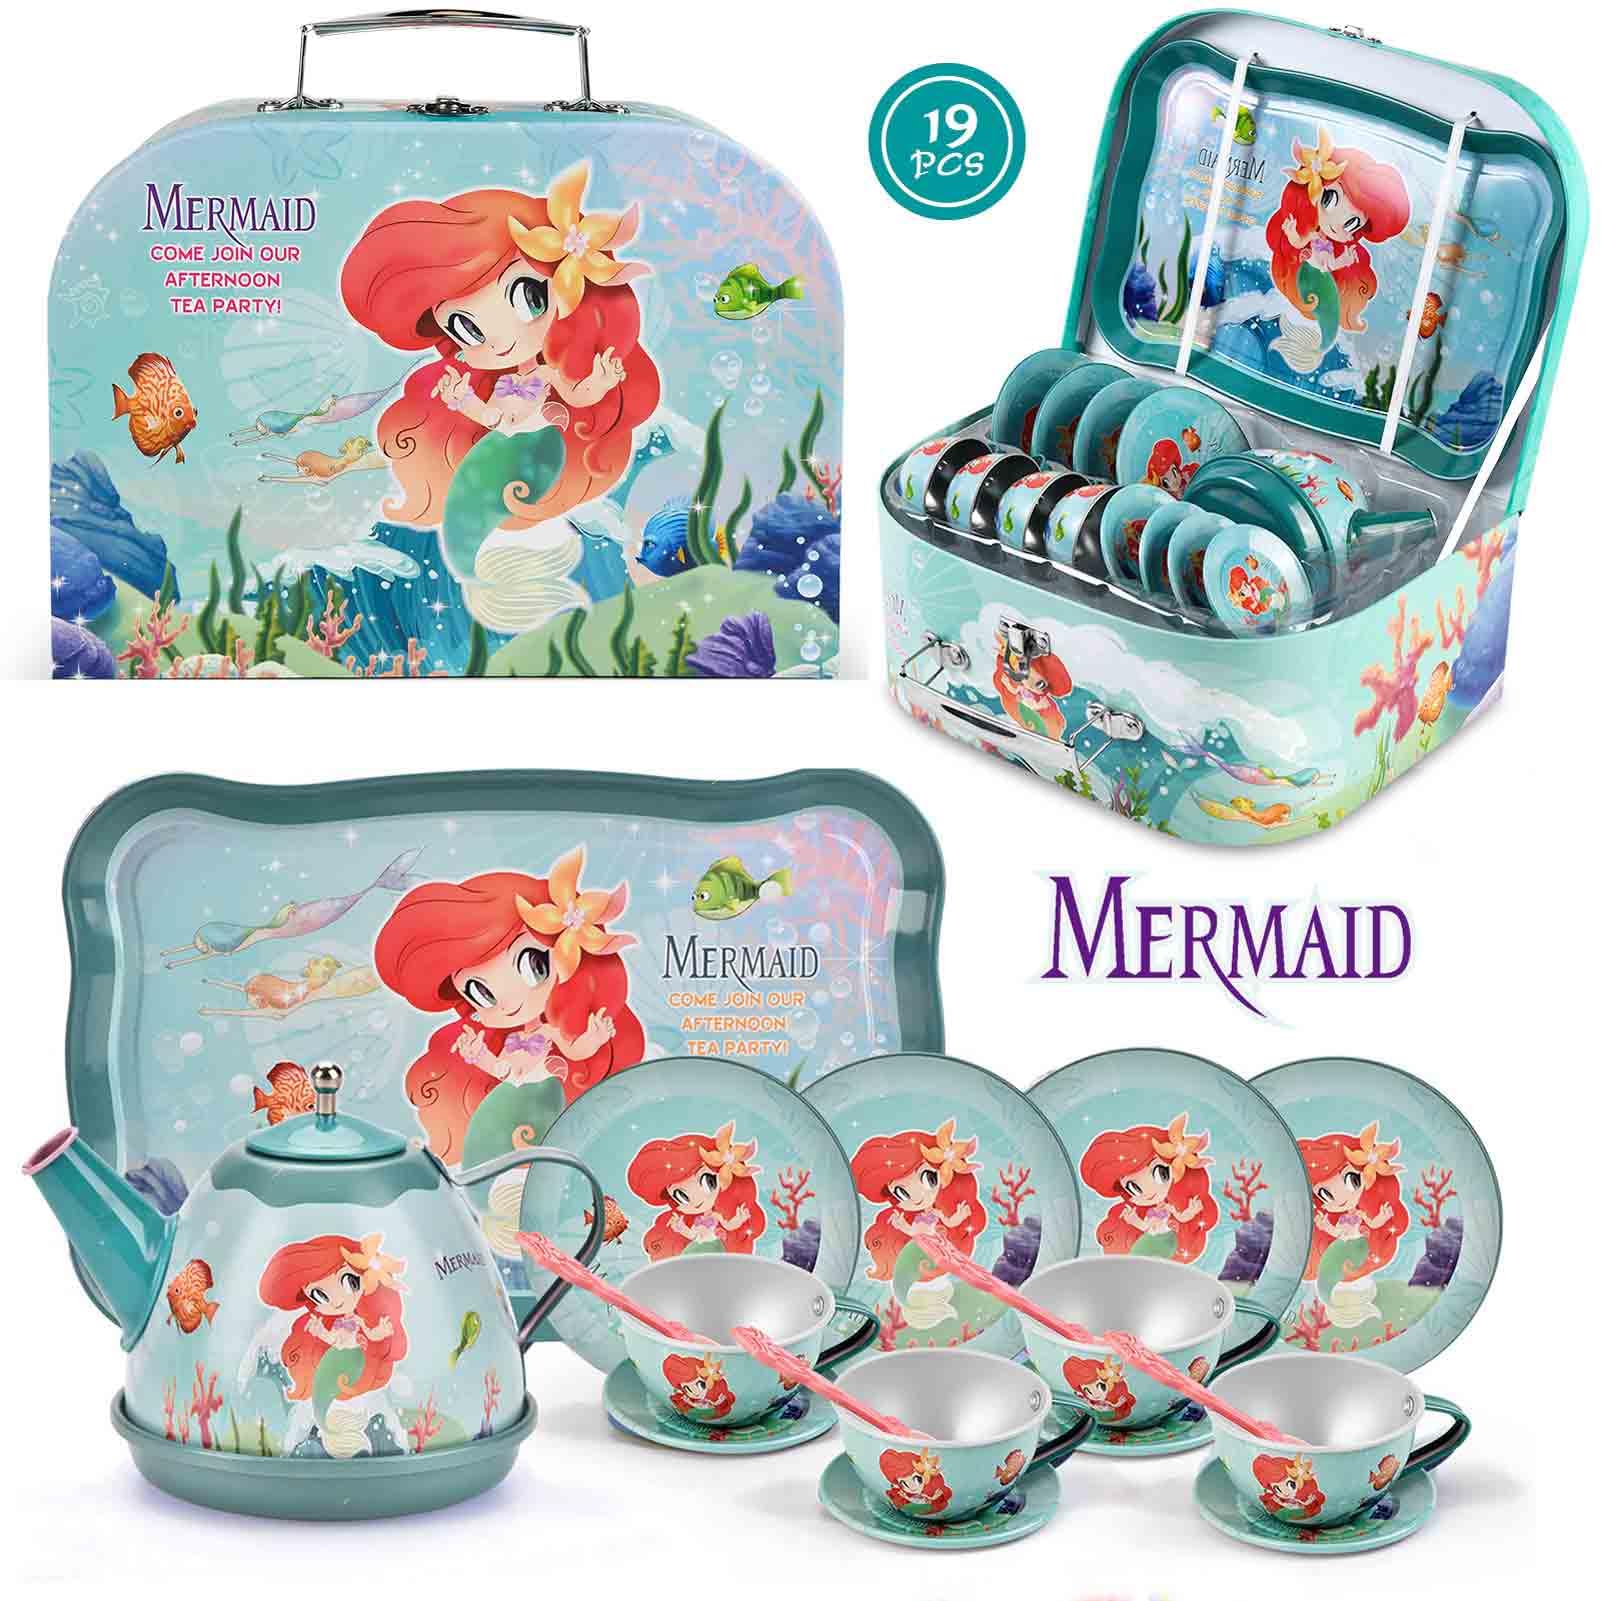 Lajeje Mermaid Tea Party Set for Little Girls, Kids Party Set Toys for 3 4 5 6 Year Old Girls, Pretend Toy Tin Tea Set & Carrying Case, Princess Tea Time Kitchen Play Toys, Birthday Gifts for Girls